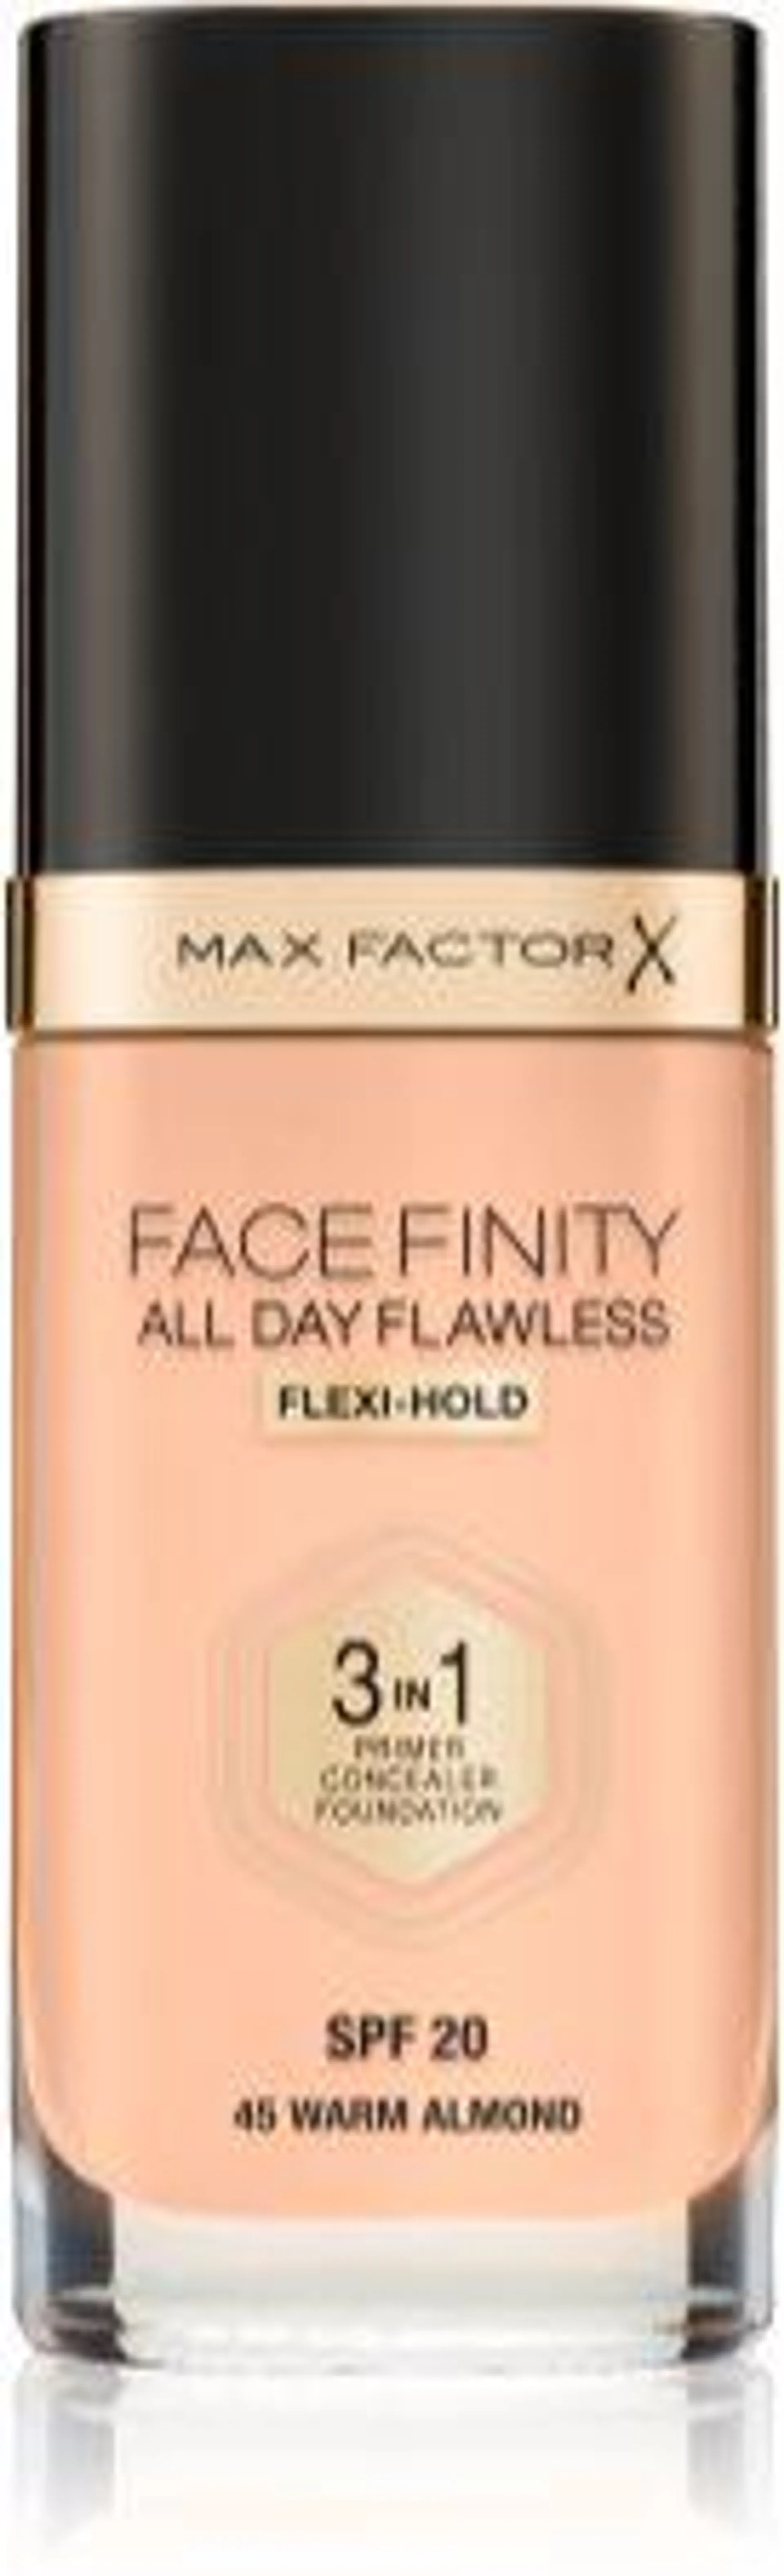 Facefinity All Day Flawless